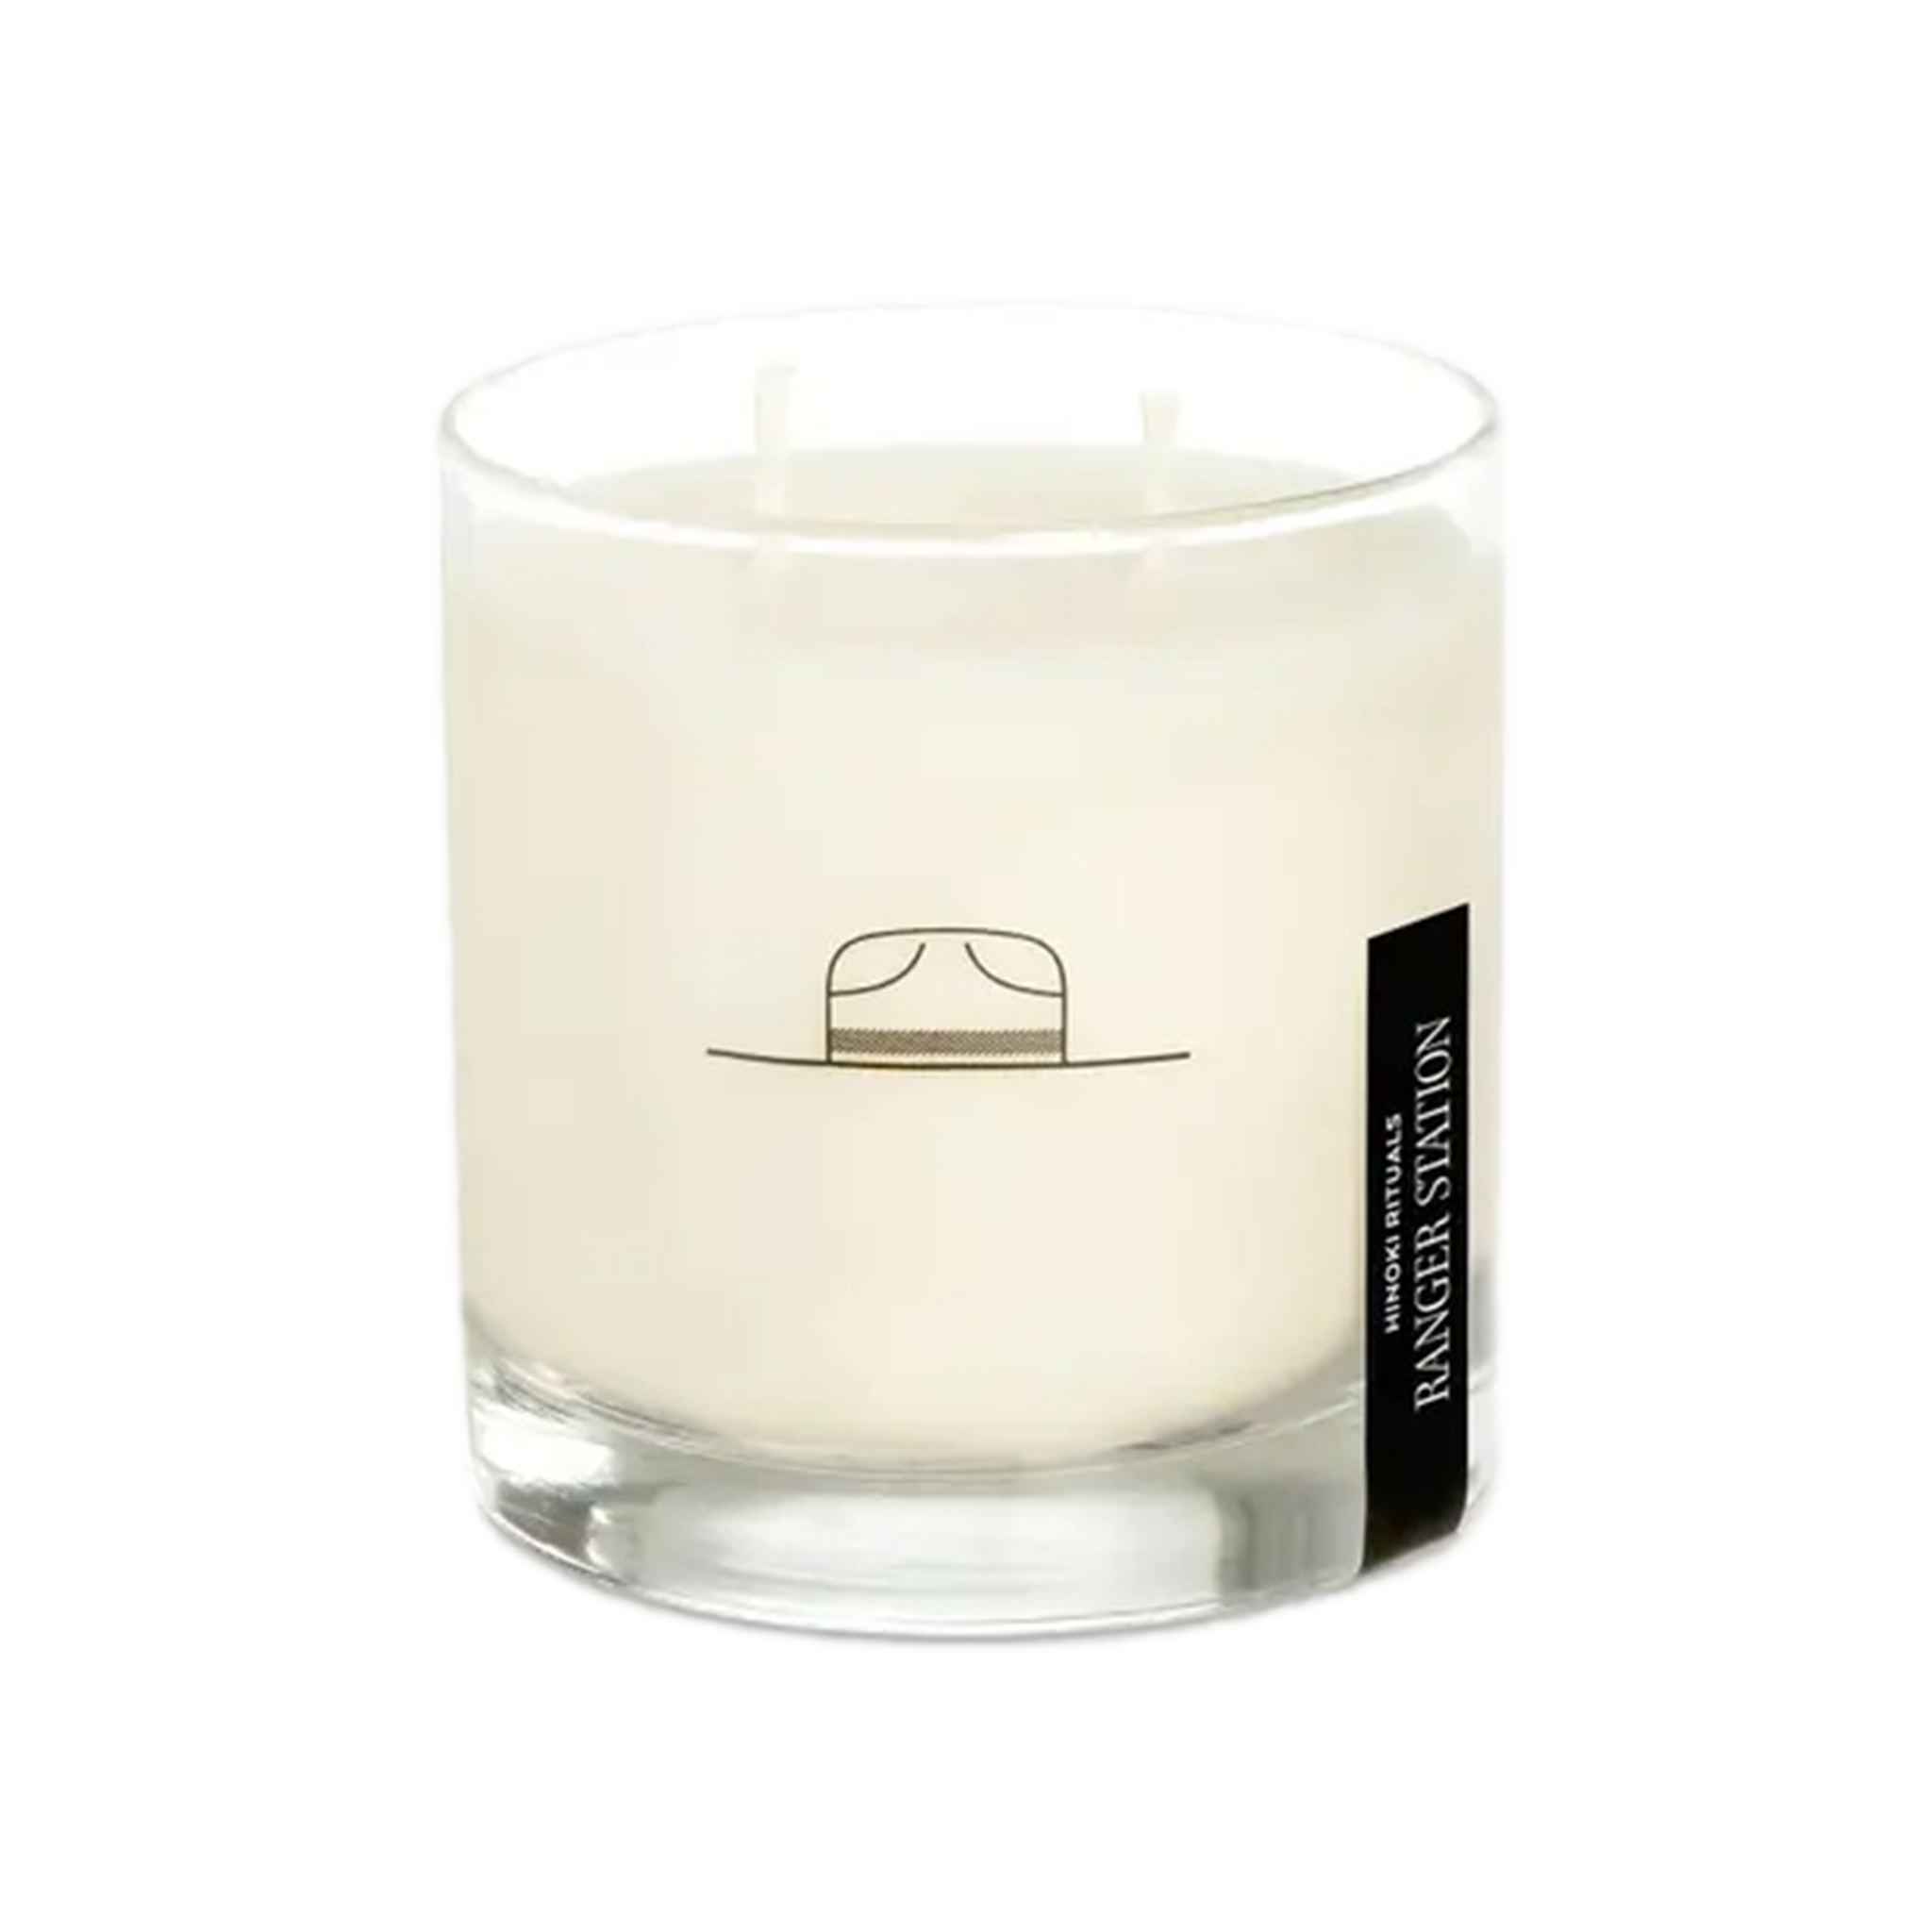 Hinoki Rituals Candle by Ranger Station